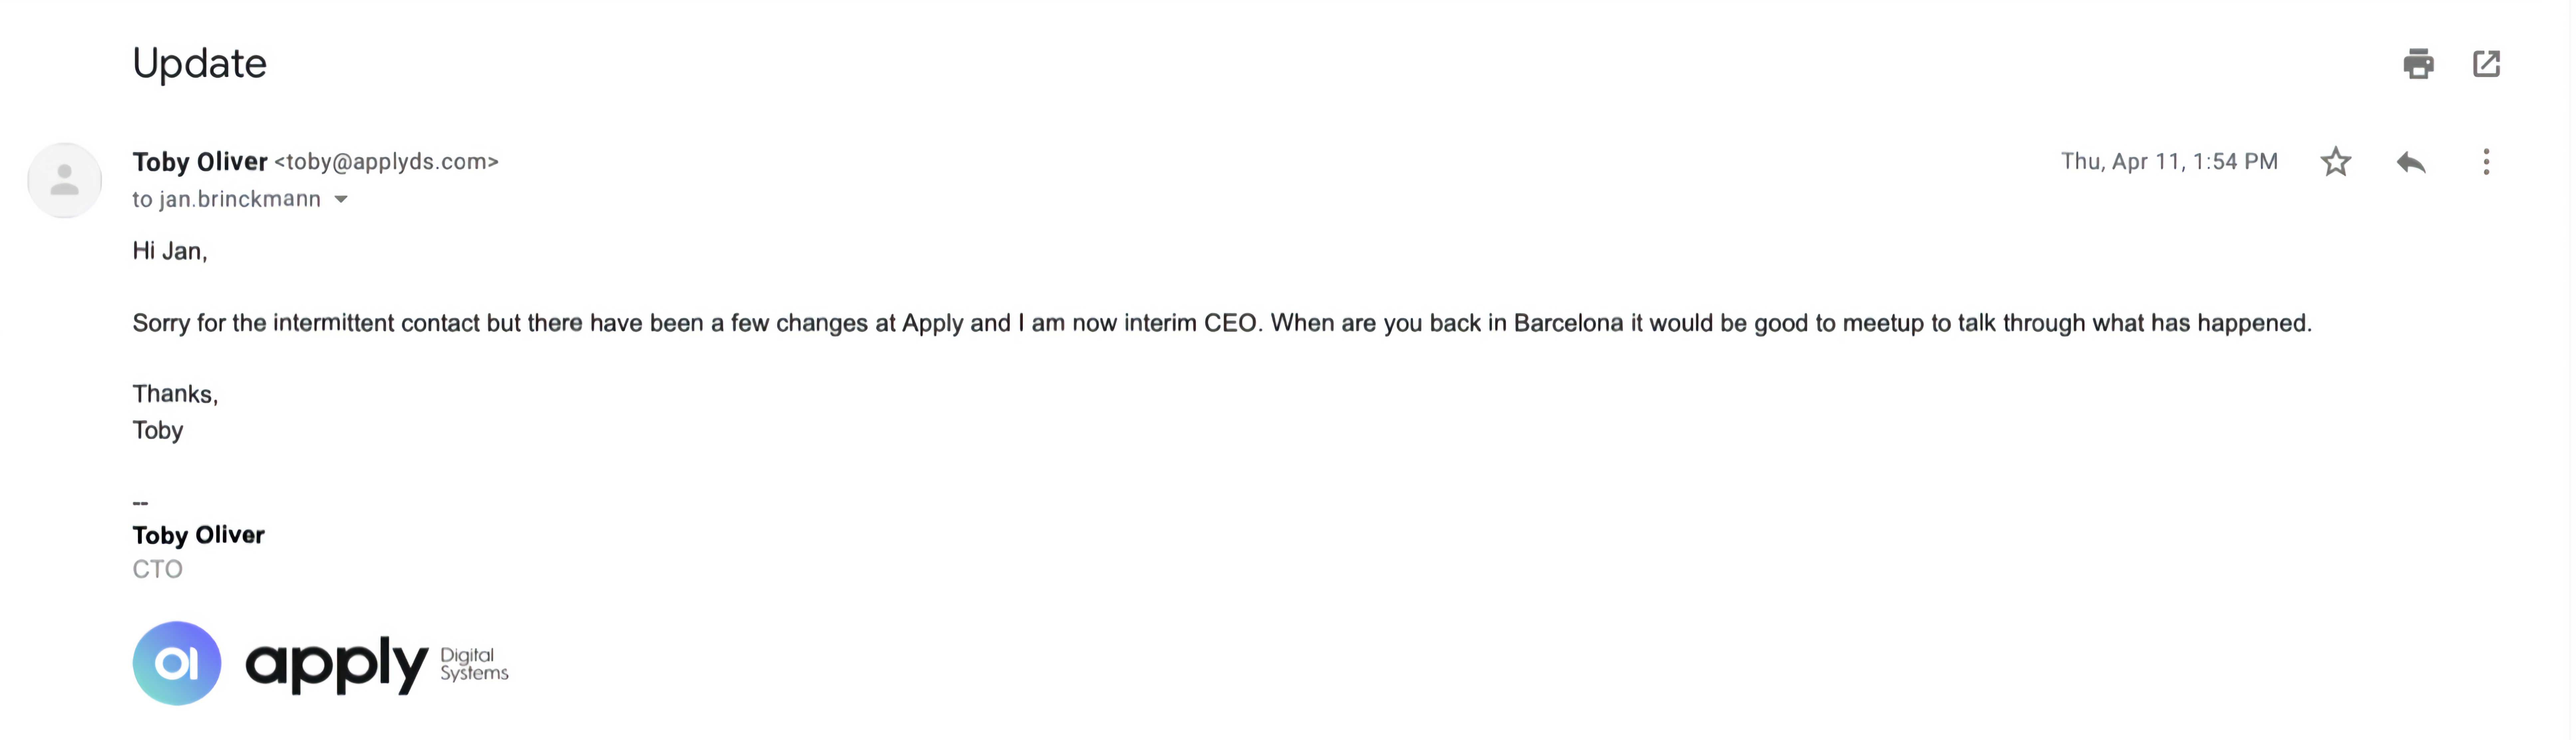 Email screenshot showing proof of Toby Oliver claiming to be Apply new CEO